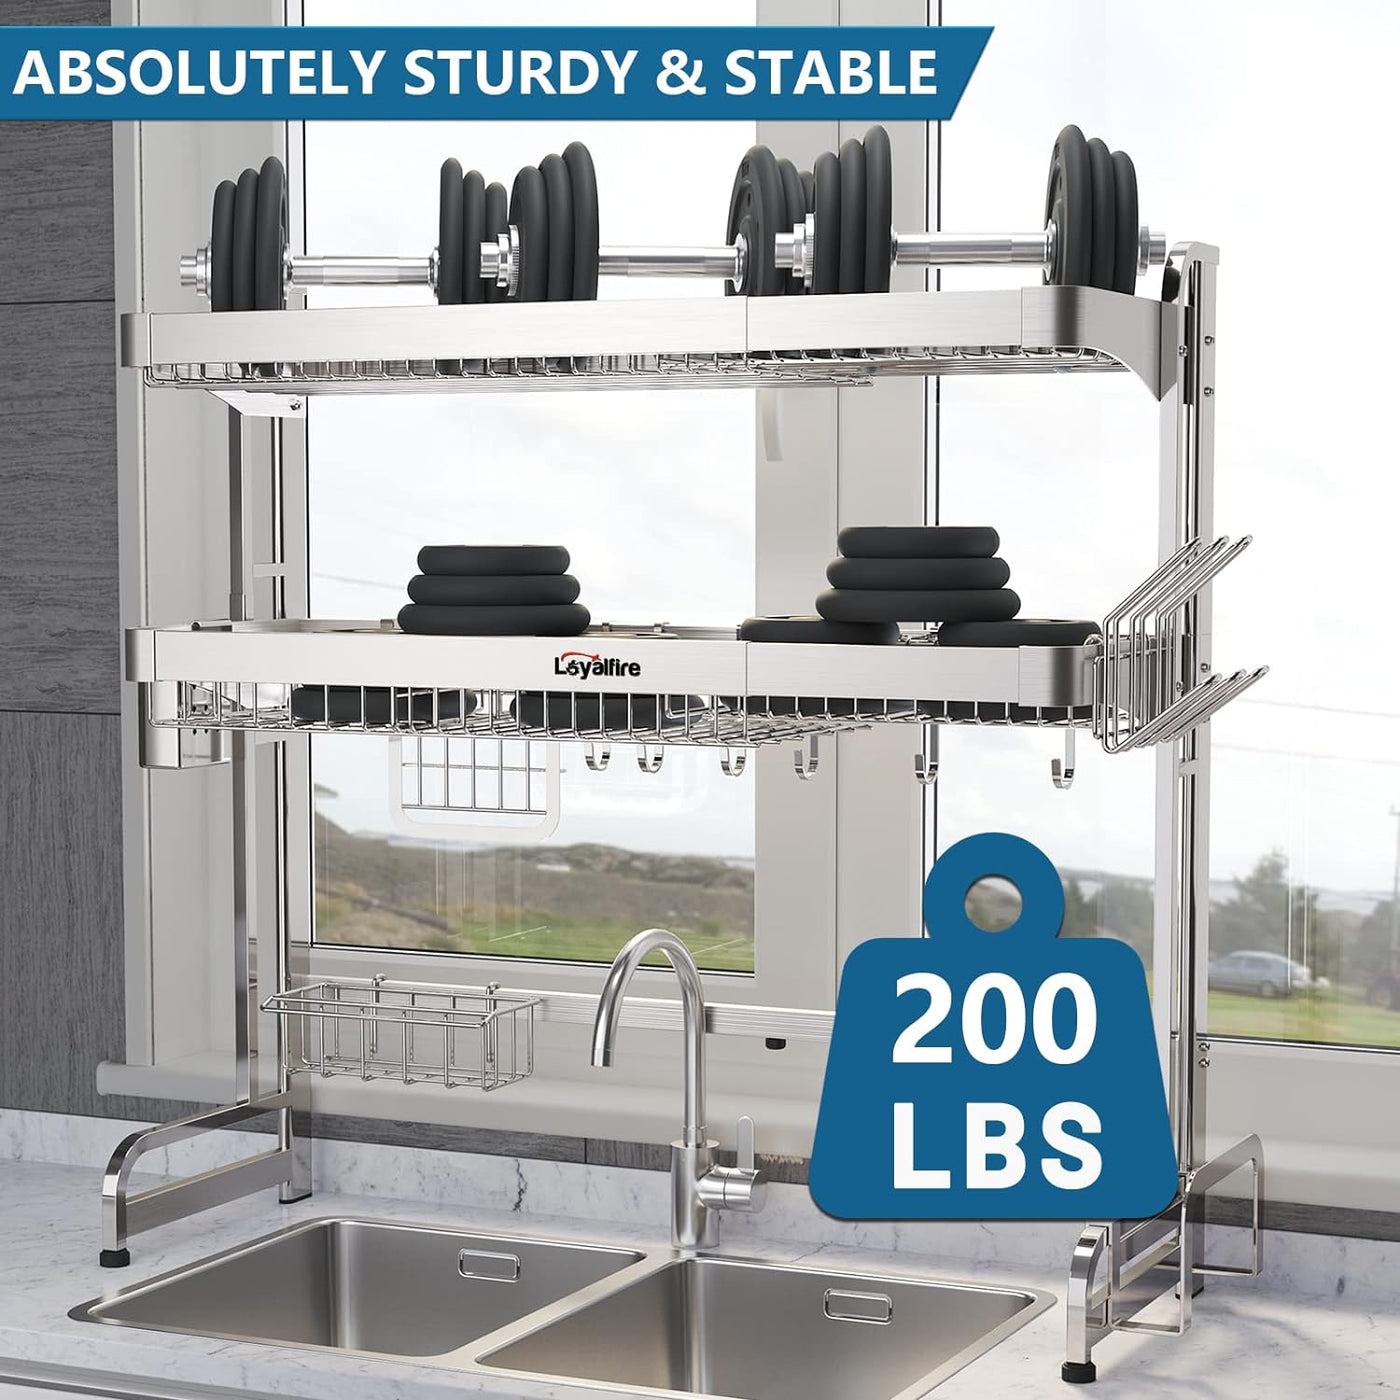 ULG Over The Sink Drying Rack, 2 Tier Length Adjustable (24.4-37